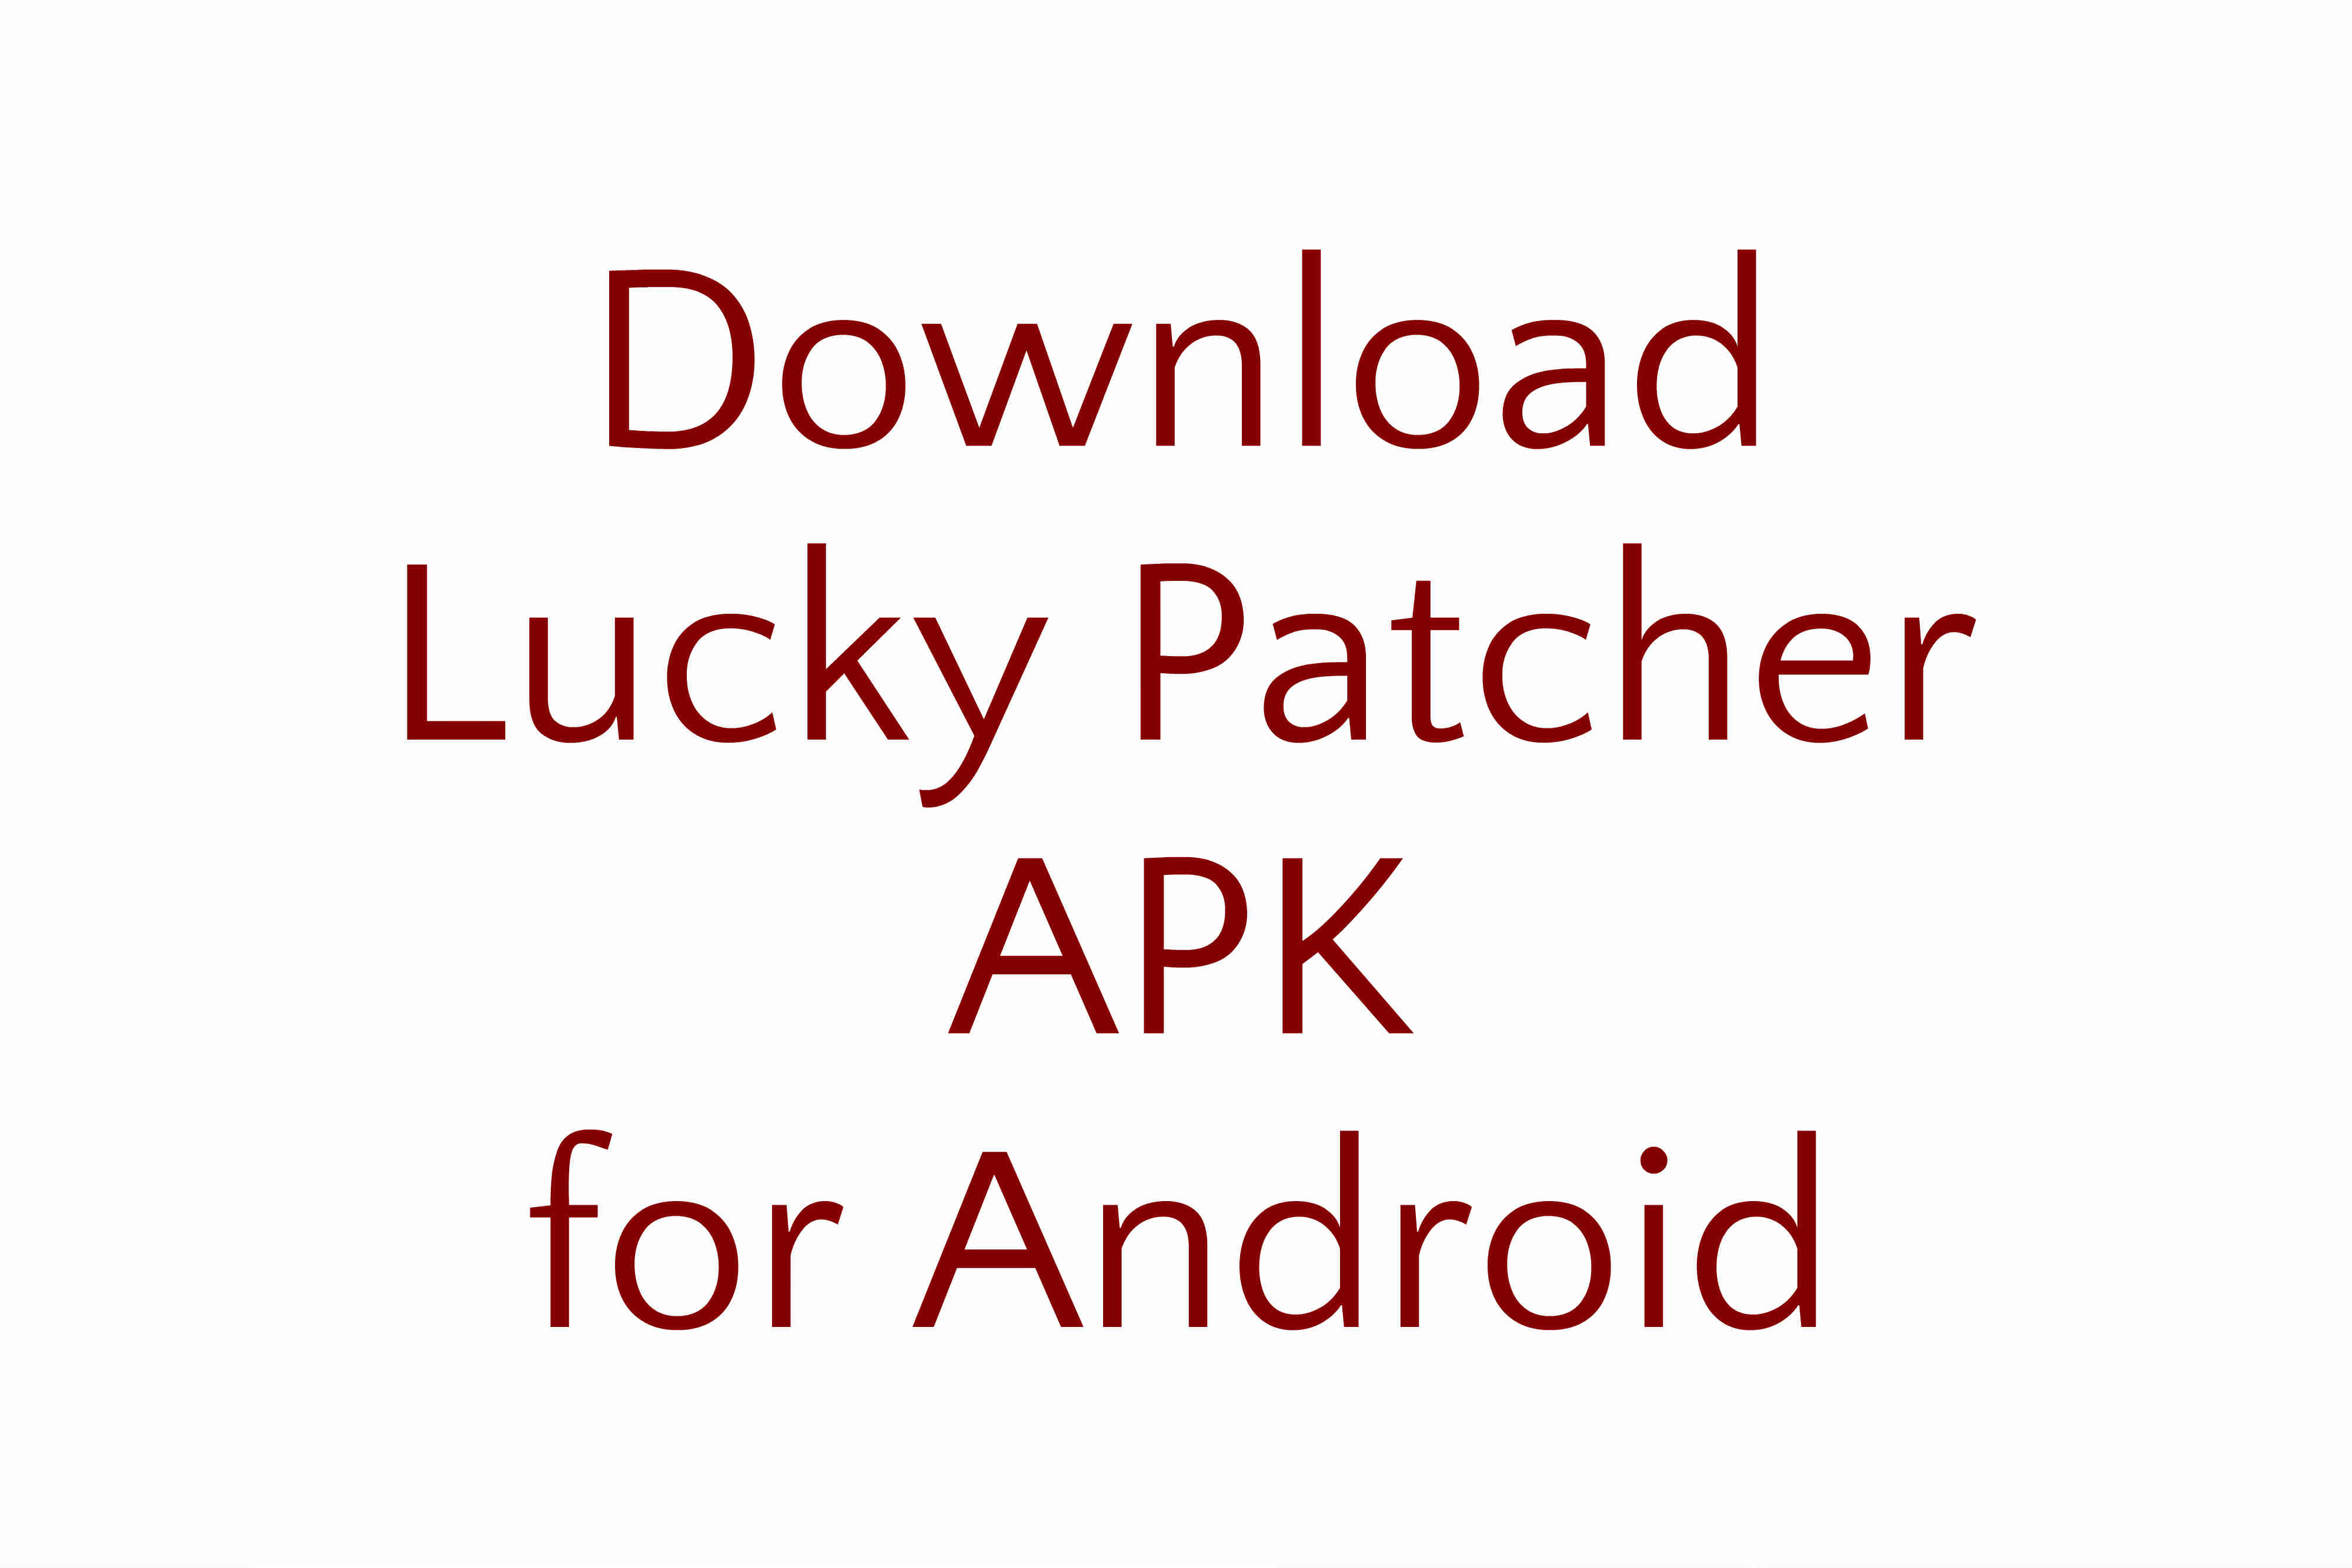 Download Lucky Patcher APK for Android